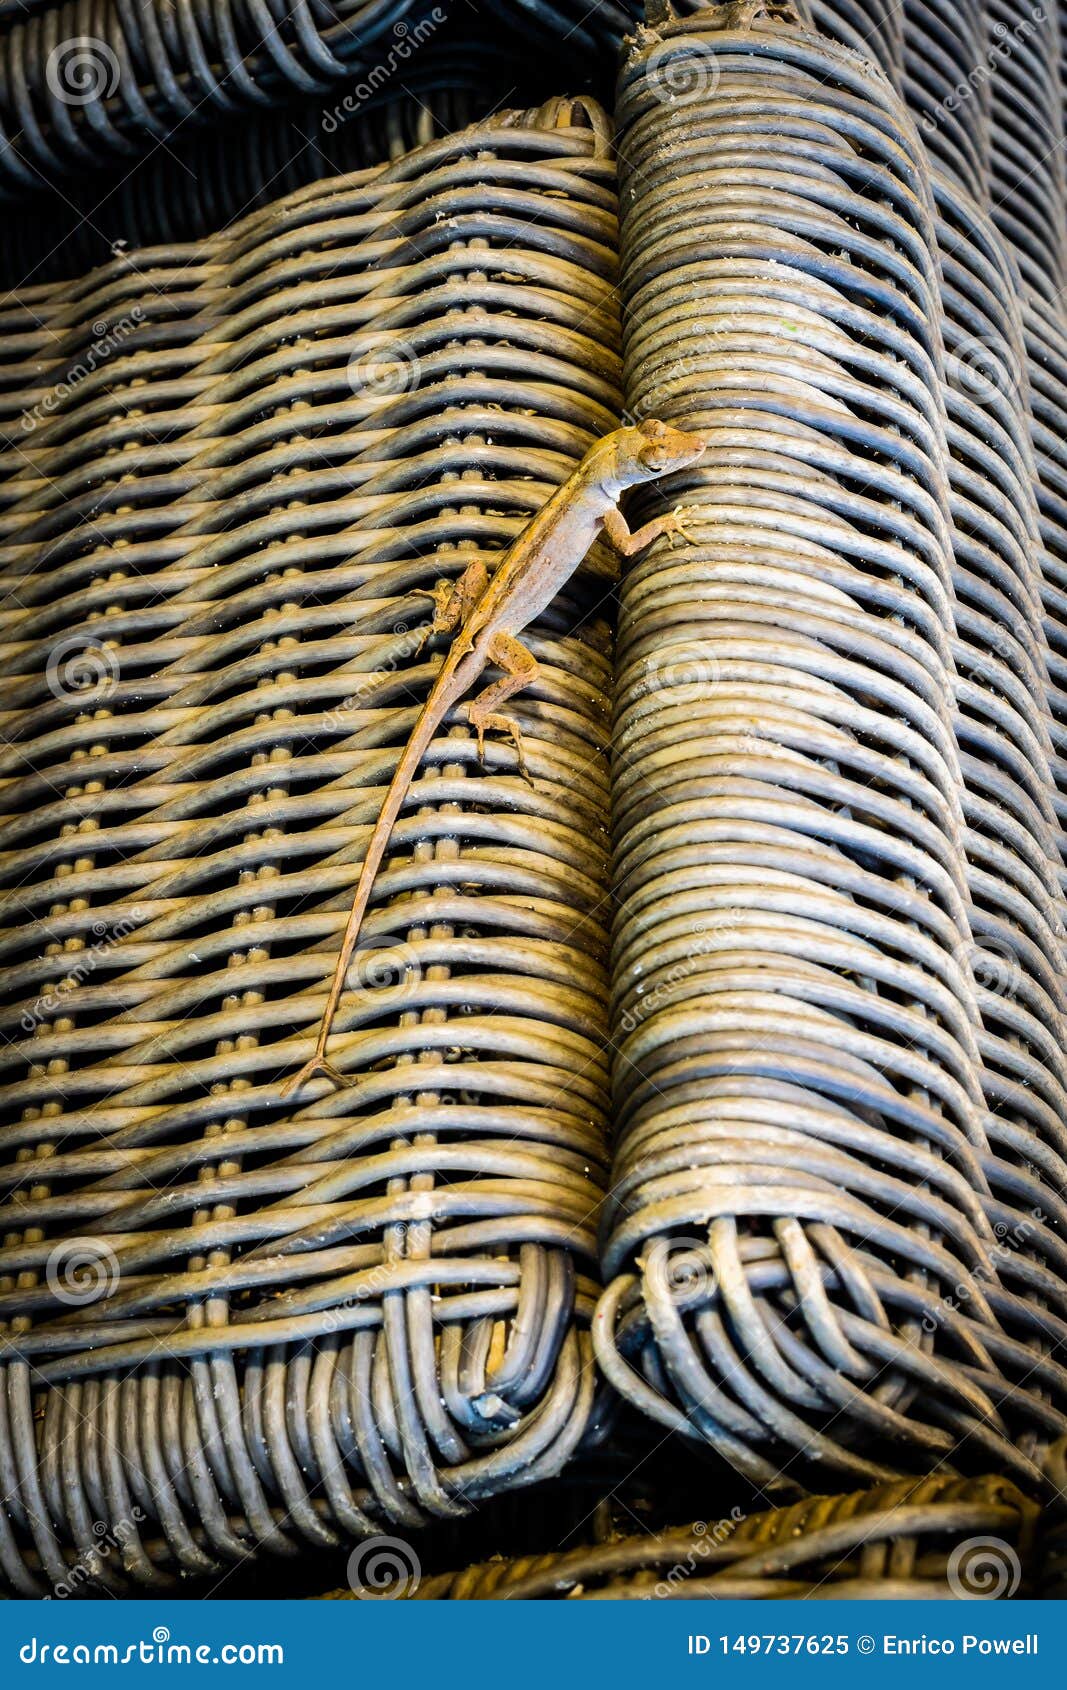 Brown Double Tail Wall Lizard Crawling on Wicker Straw Woven Chair